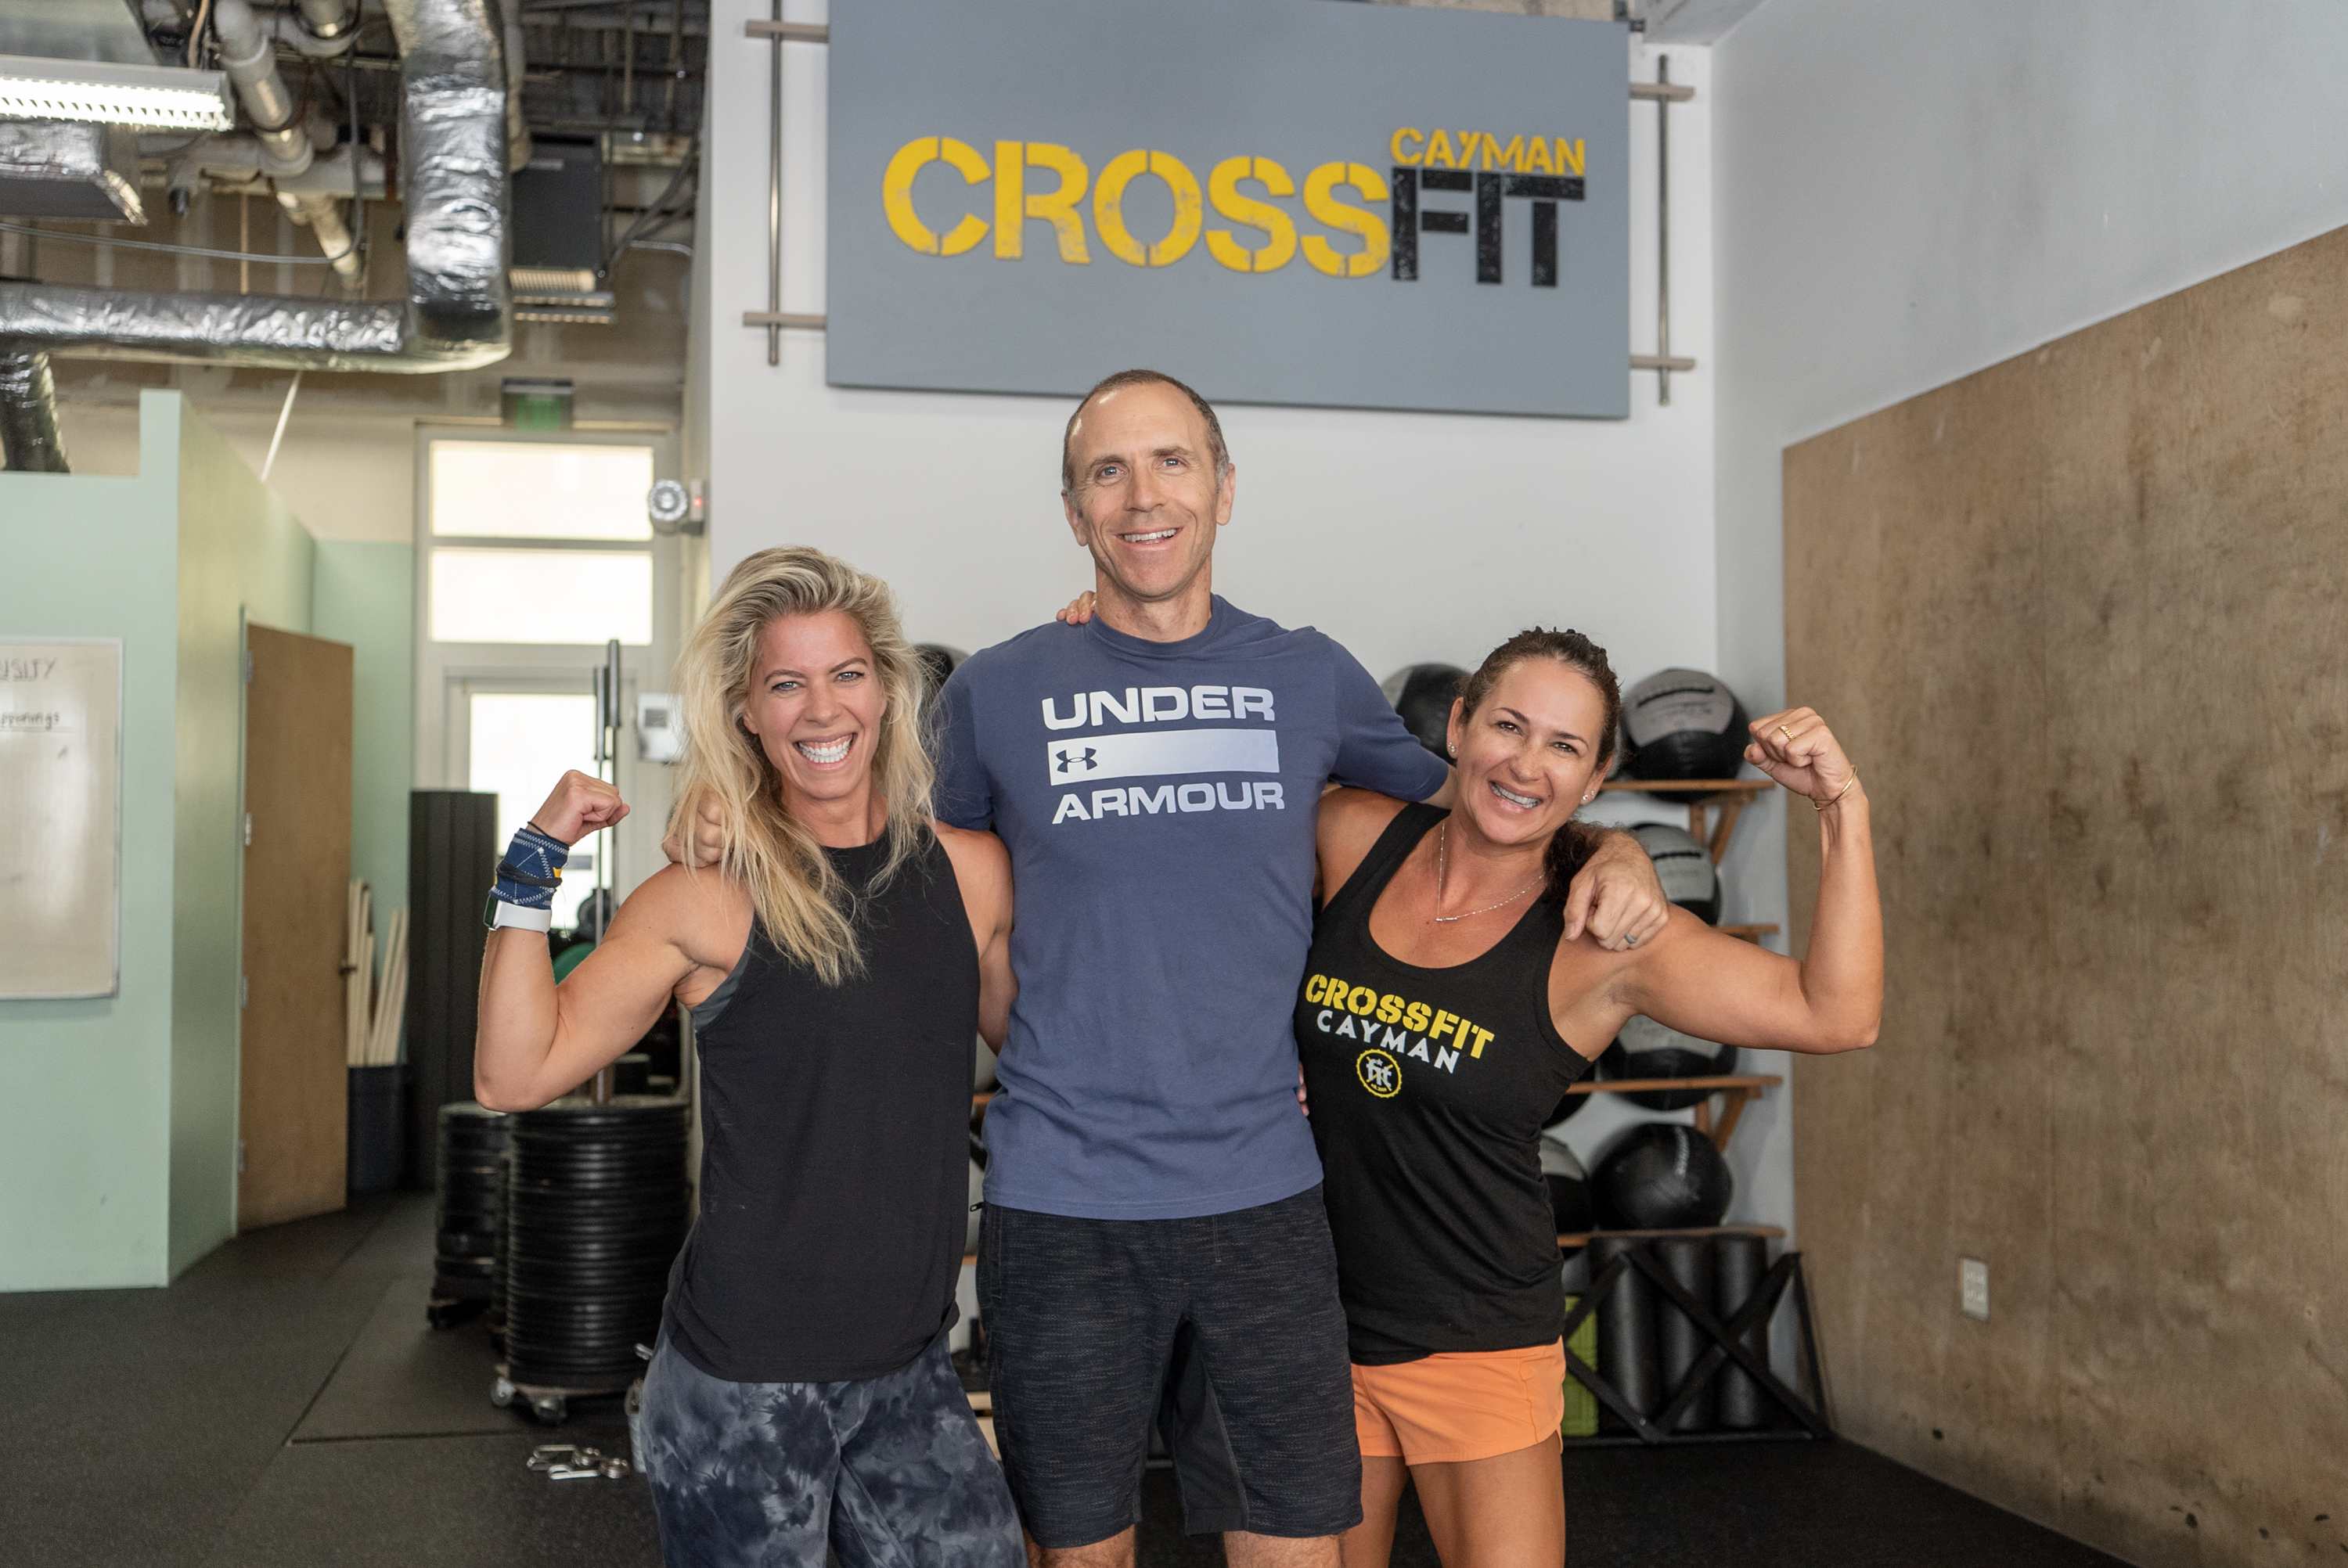 A man and two women standing in gym